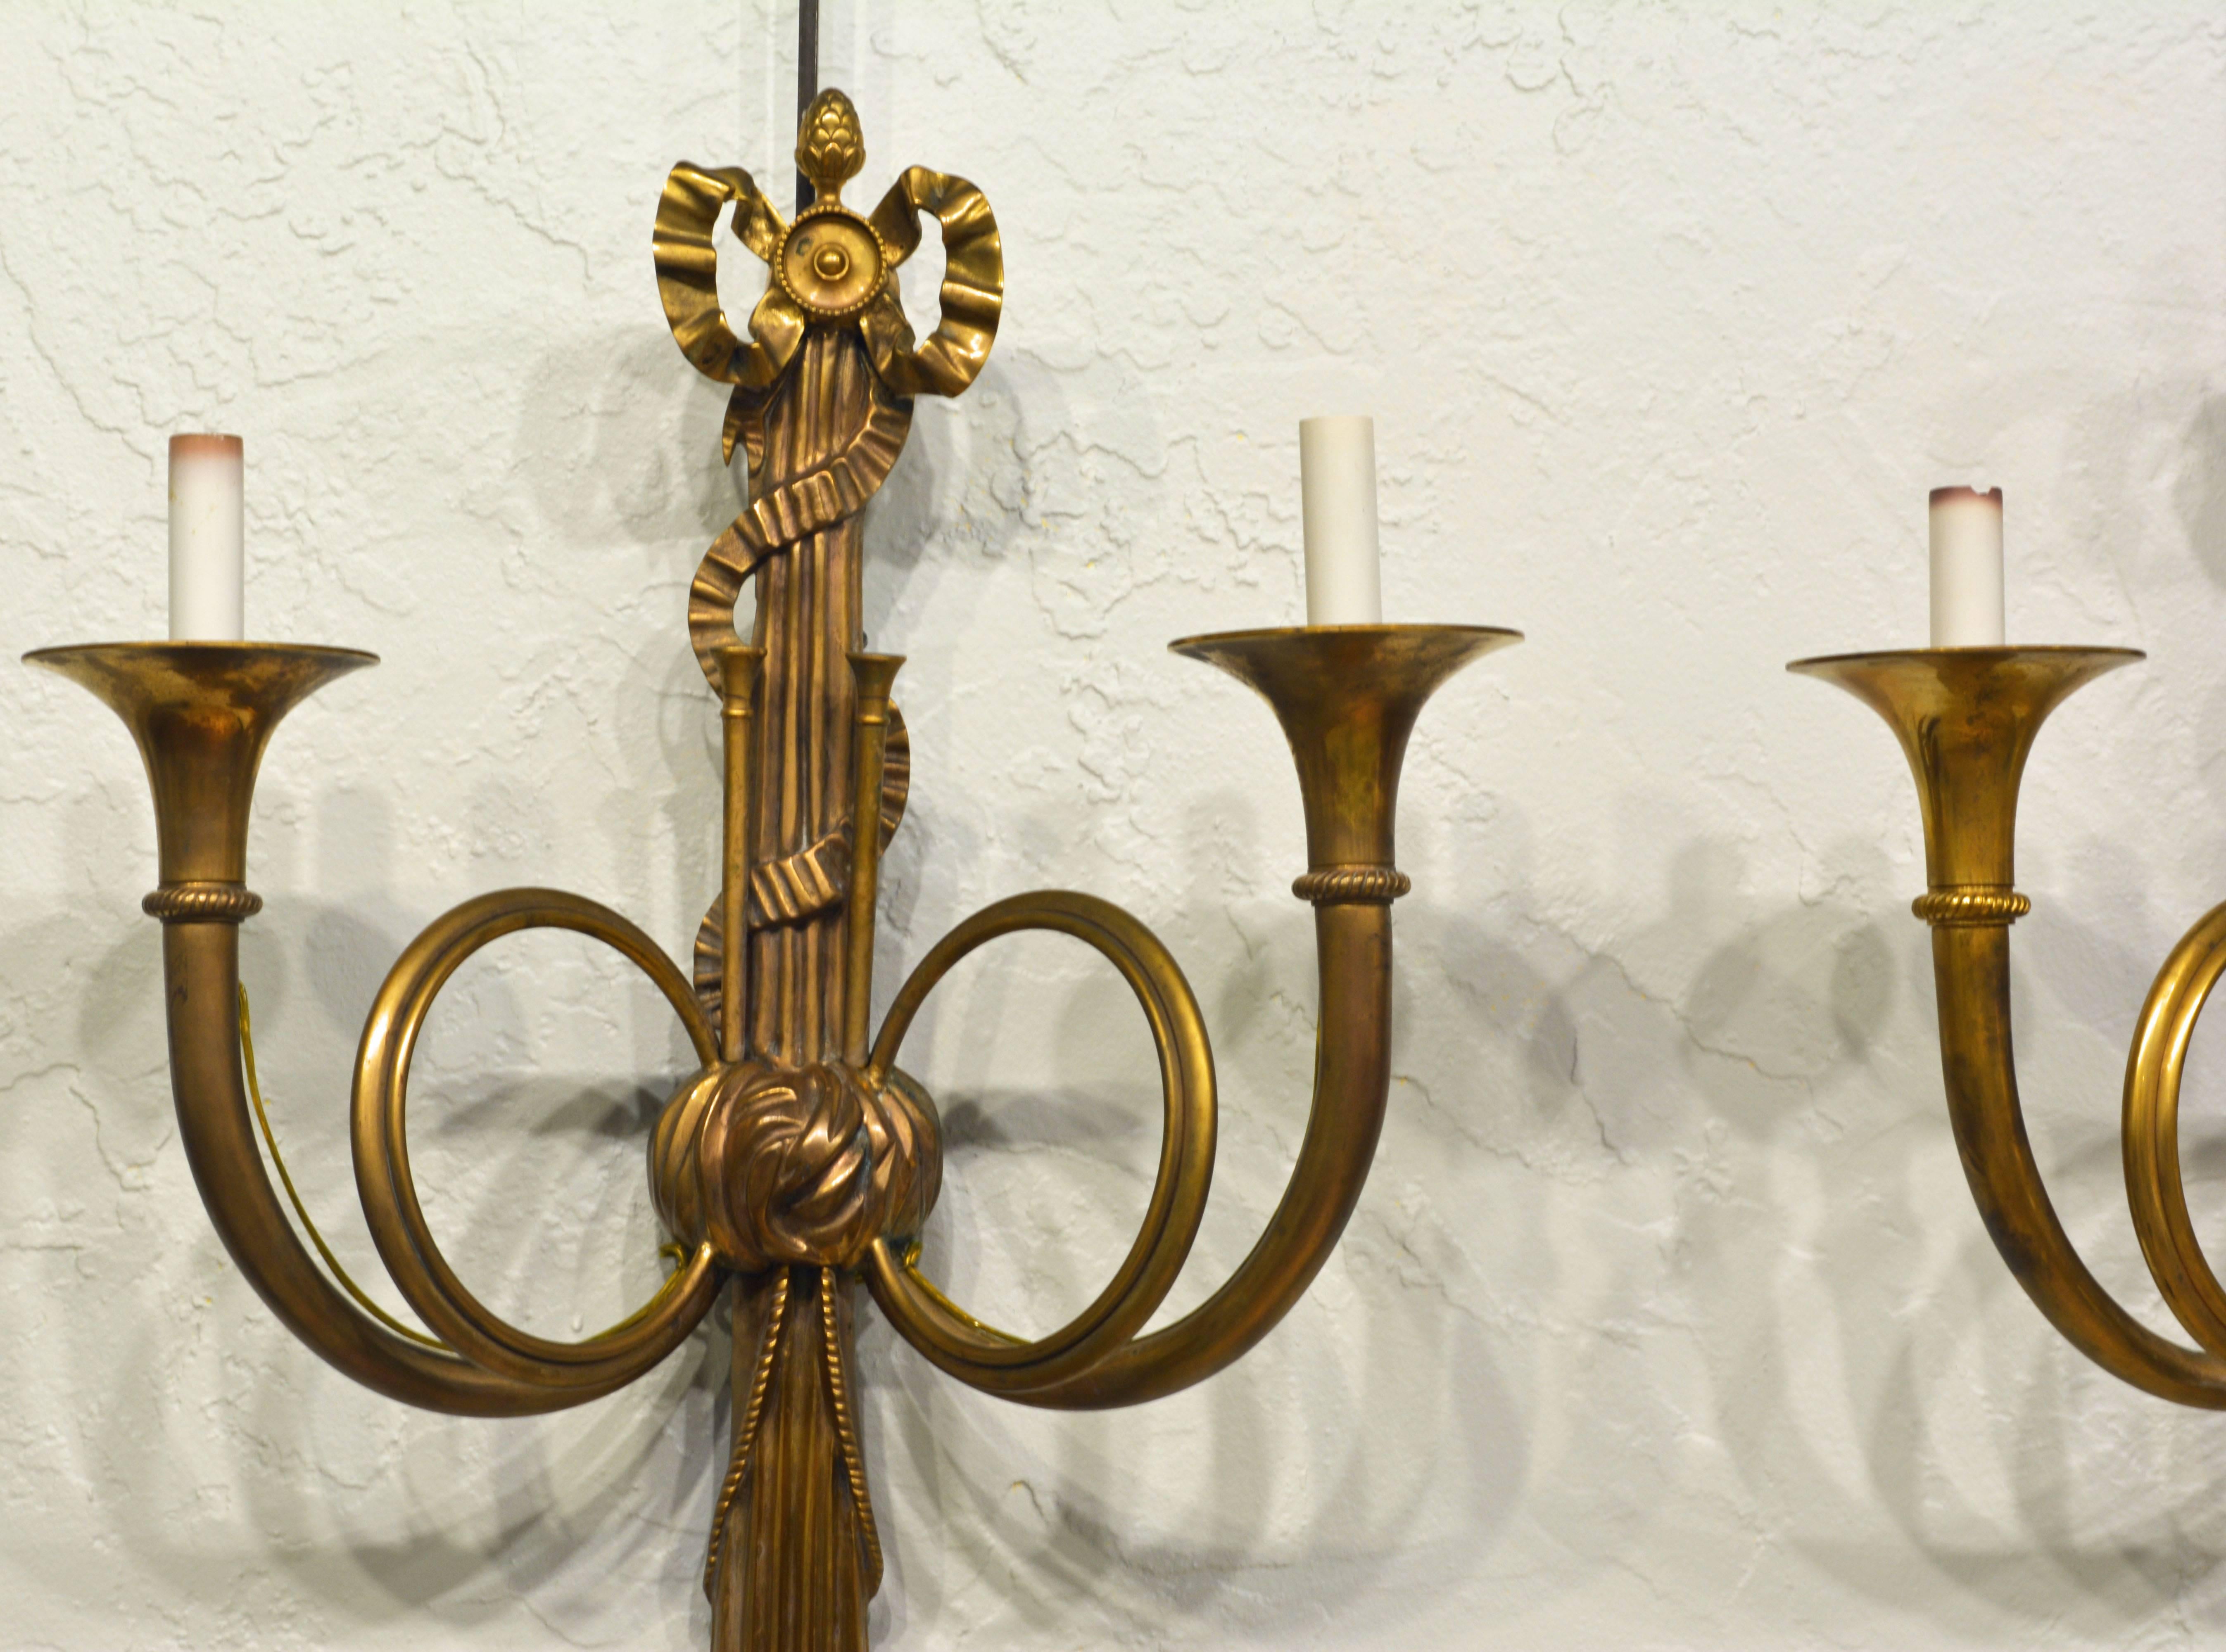 31 inches tall these wall sconces are impressively beautiful featuring each two light arms in the shape of hunting horns, topped by ribbon bow and ending in drapings with tassels, all in the Louis XVI tradition. The sconces are electrified.